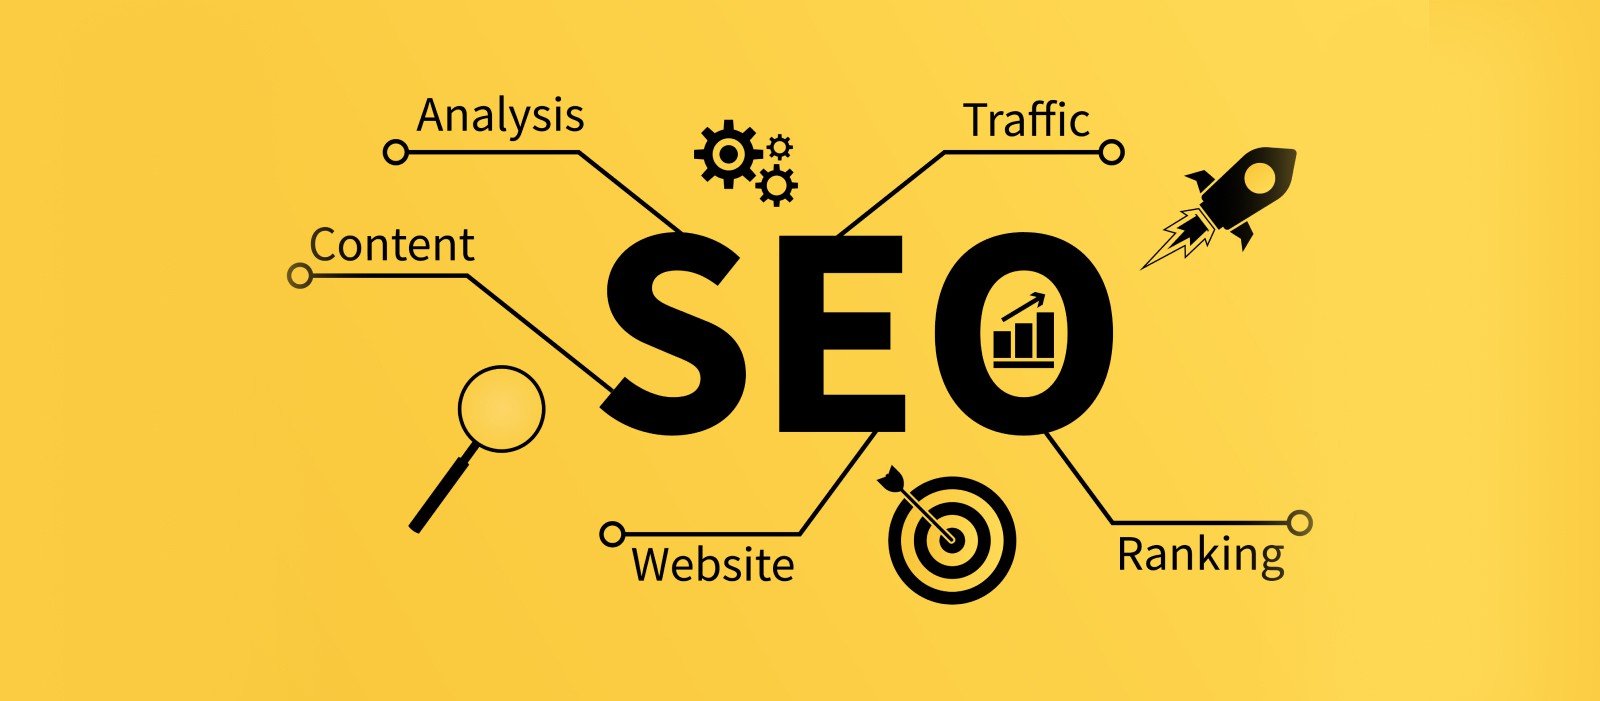 15 tips for improving SEO for your website